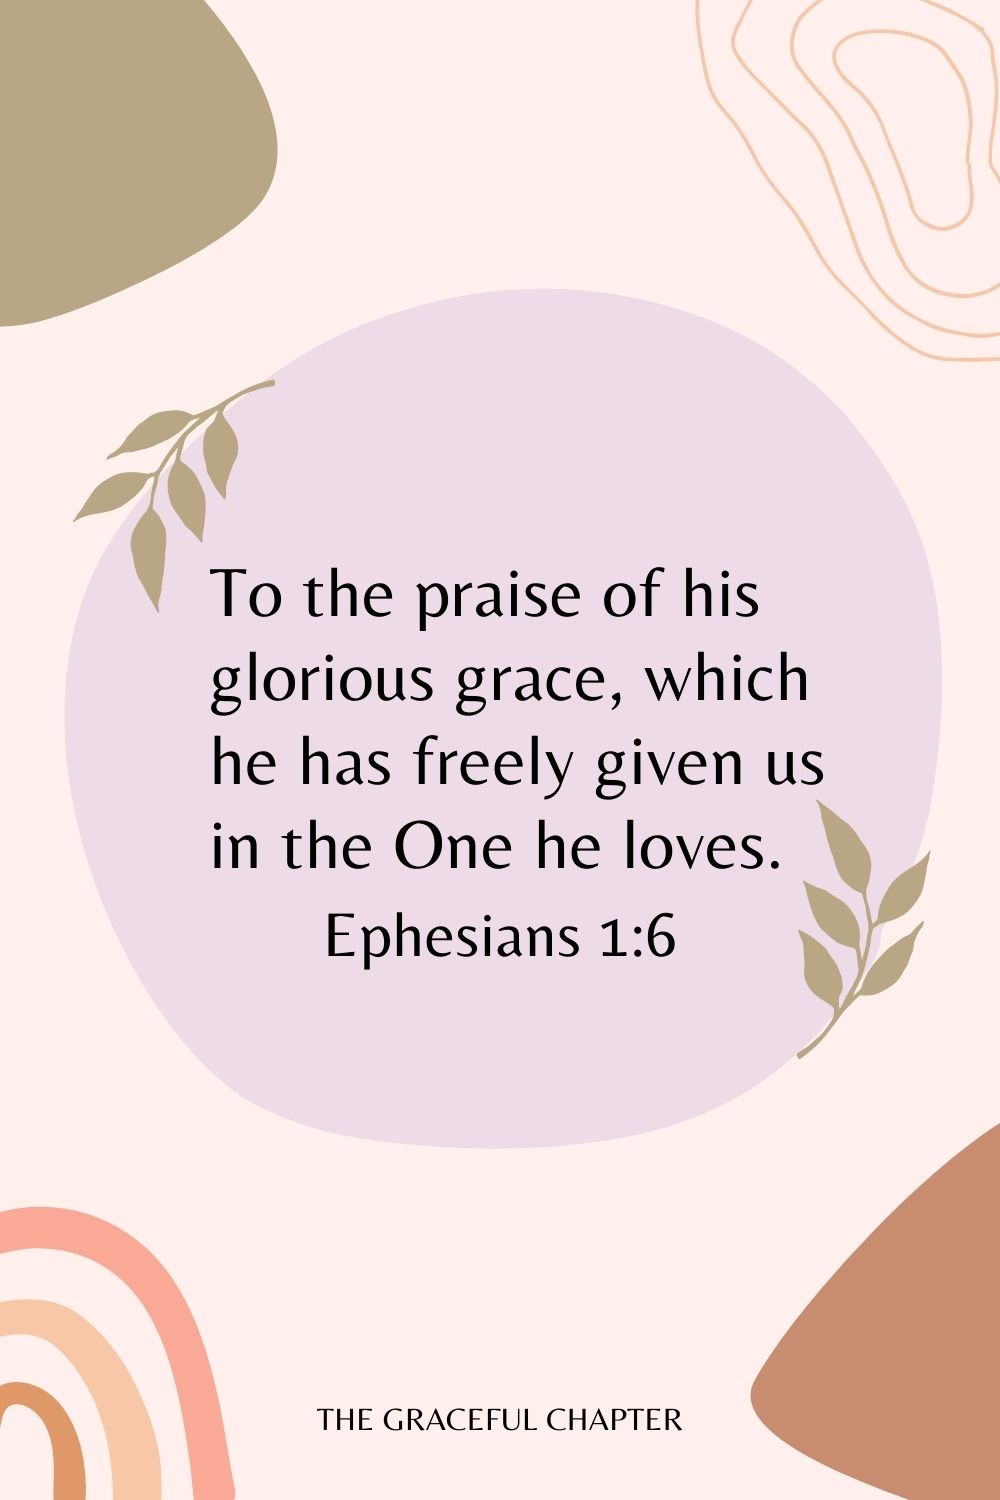 To the praise of his glorious grace, which he has freely given us in the One he loves. Ephesians 1:6